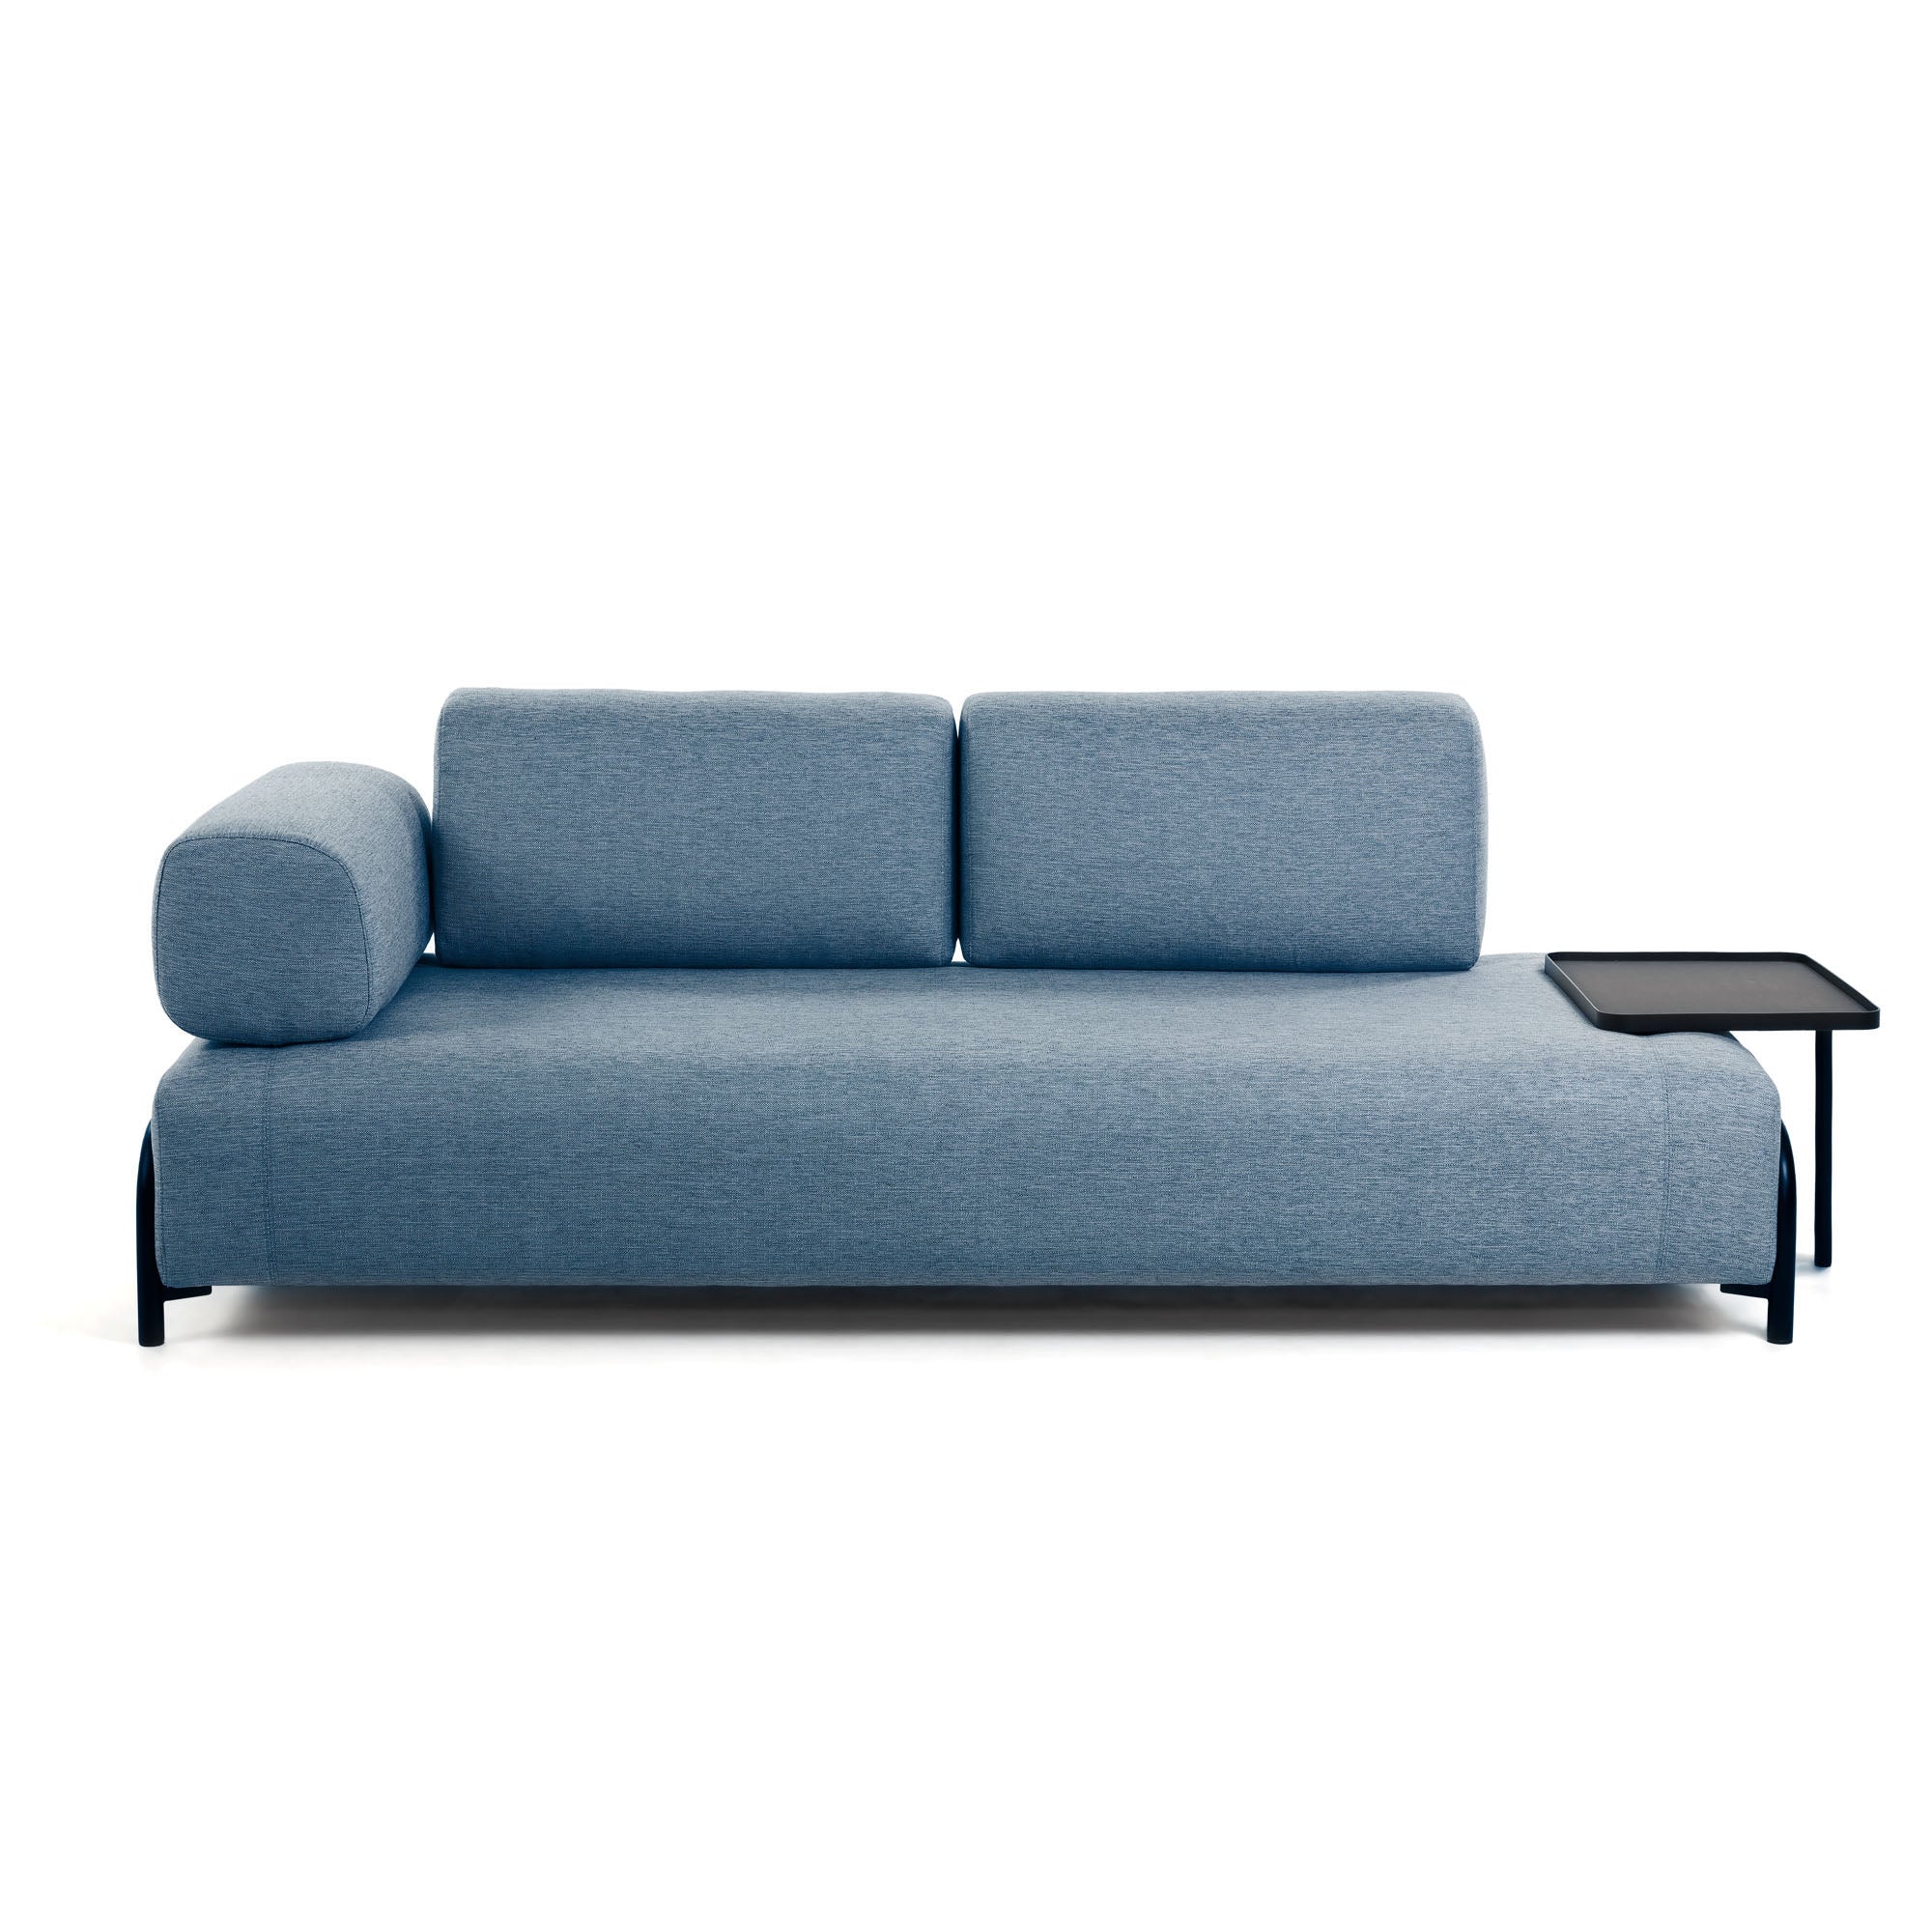 Compo 3 seater sofa with large tray in blue, 252 cm